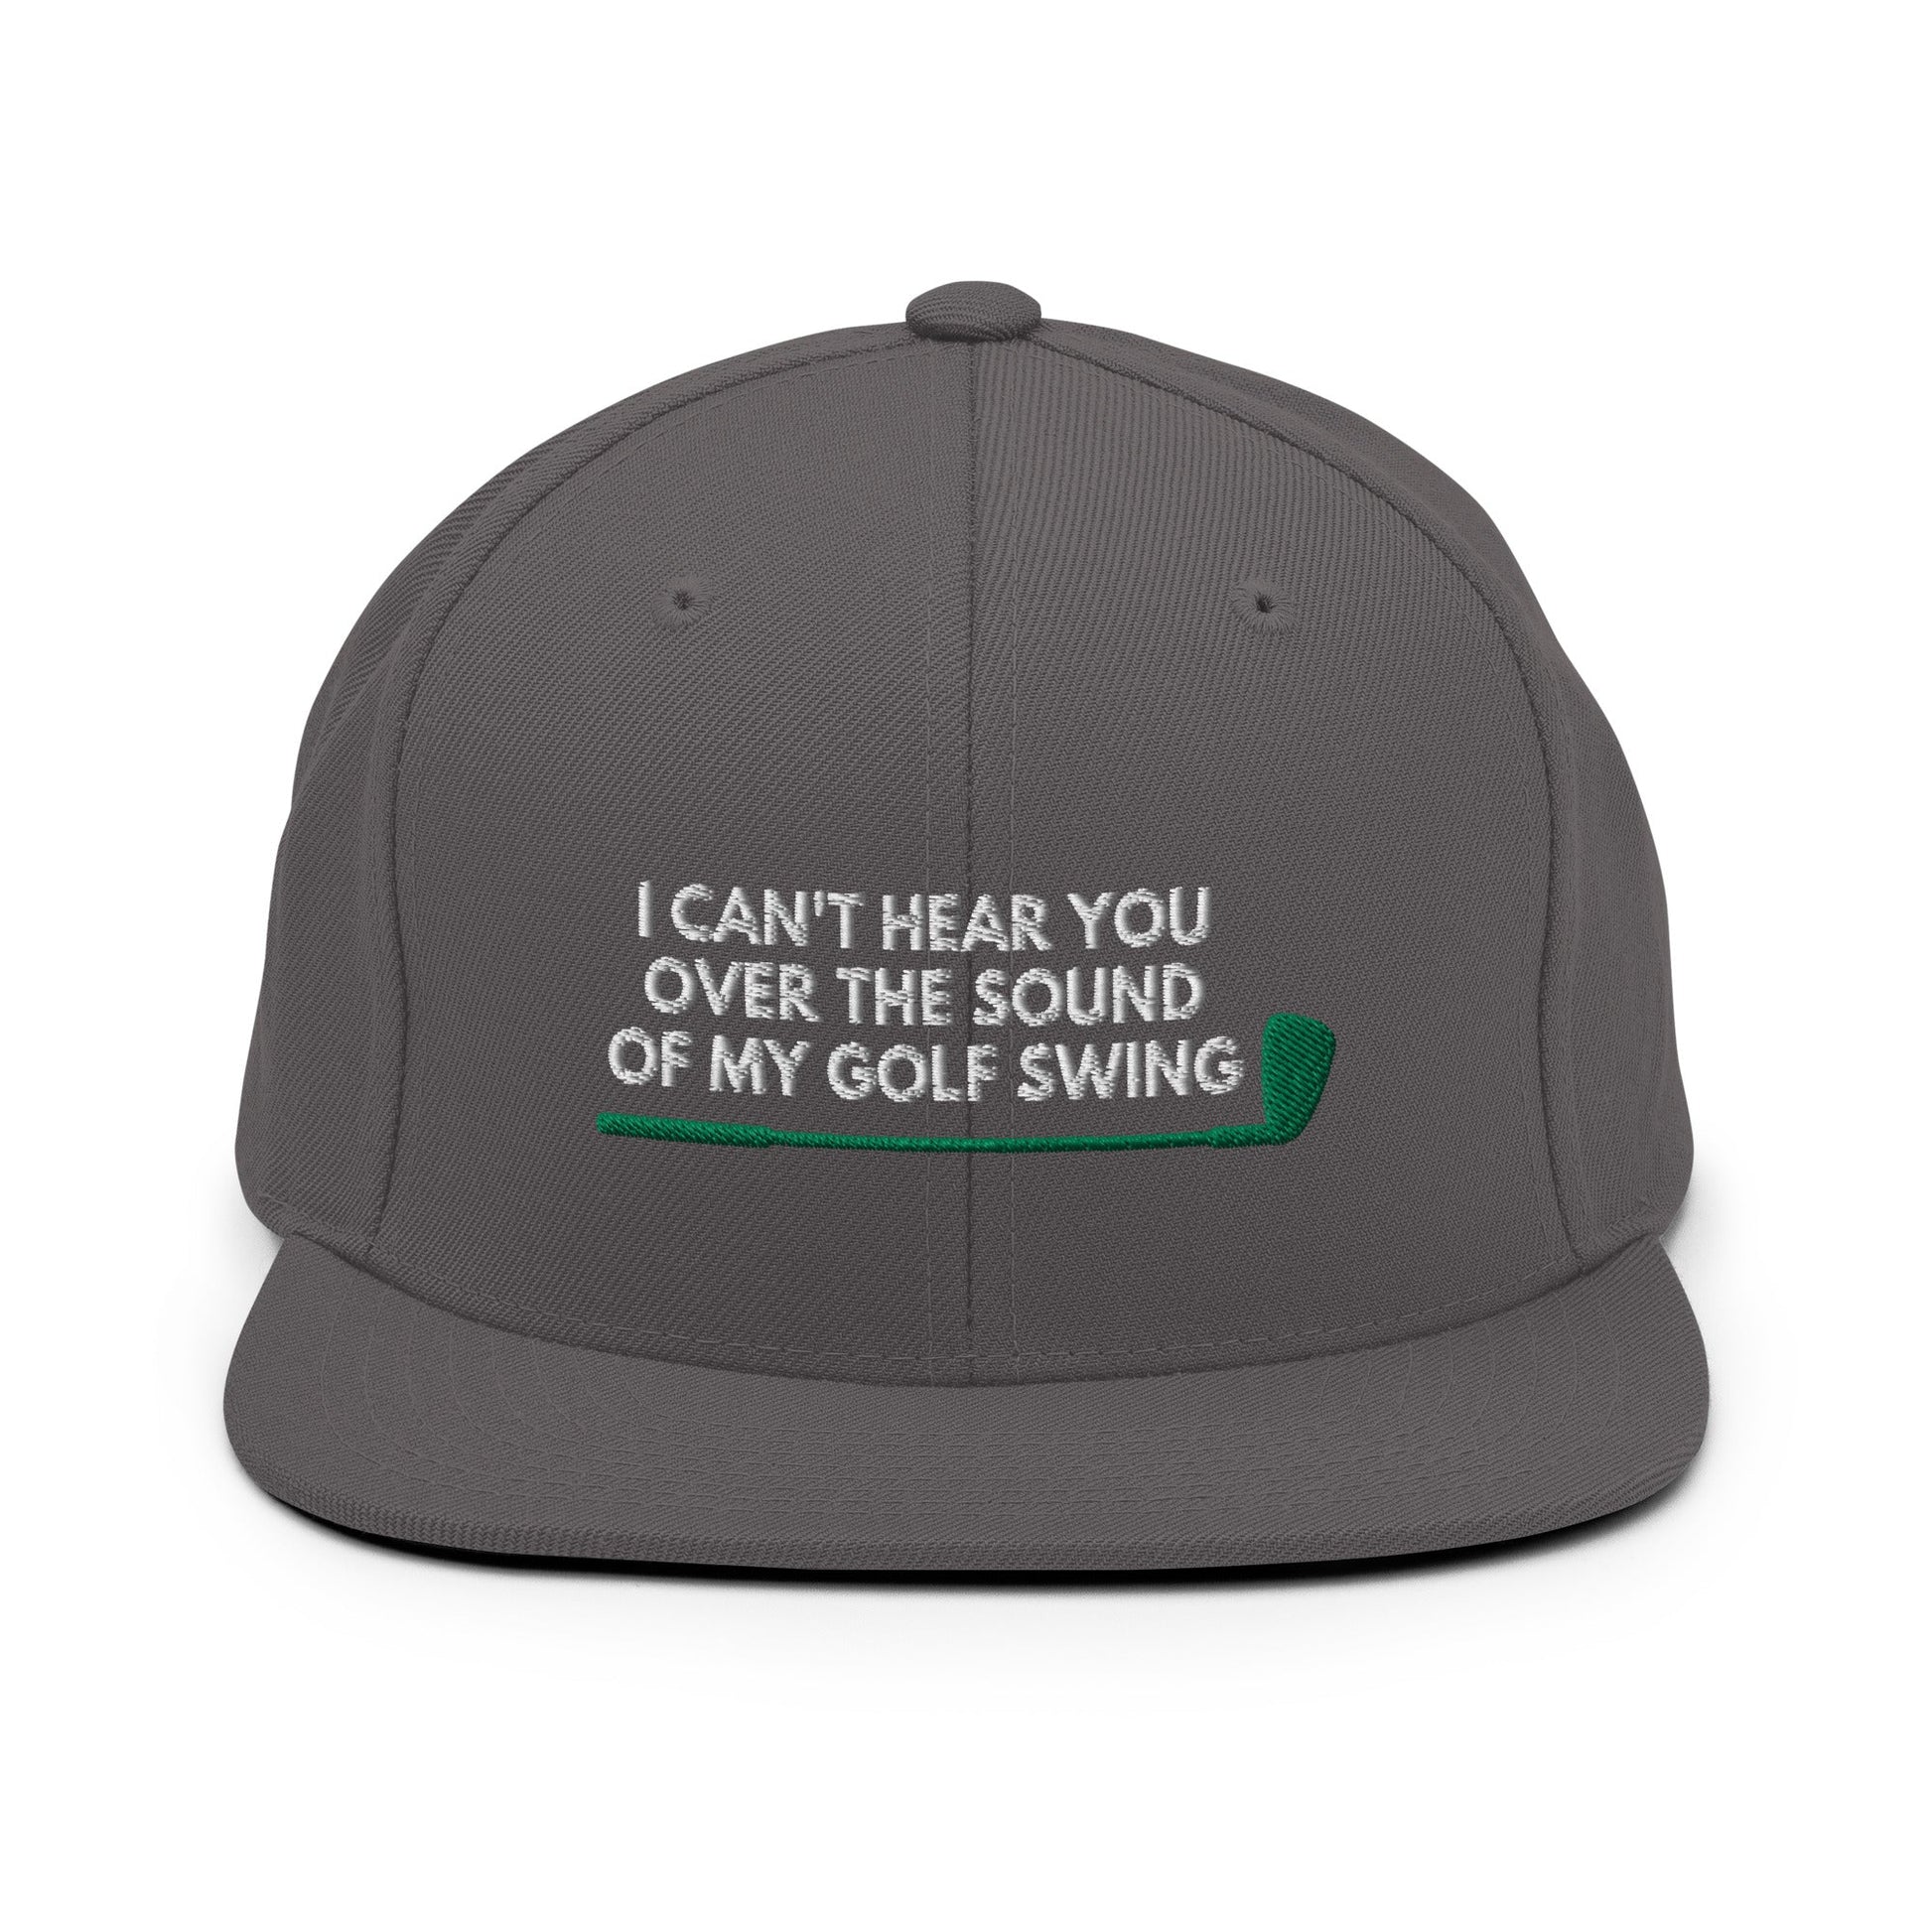 Funny Golfer Gifts  Snapback Hat Dark Grey I Cant Hear You Over The Sound Of My Golf Swing Hat Snapback Hat